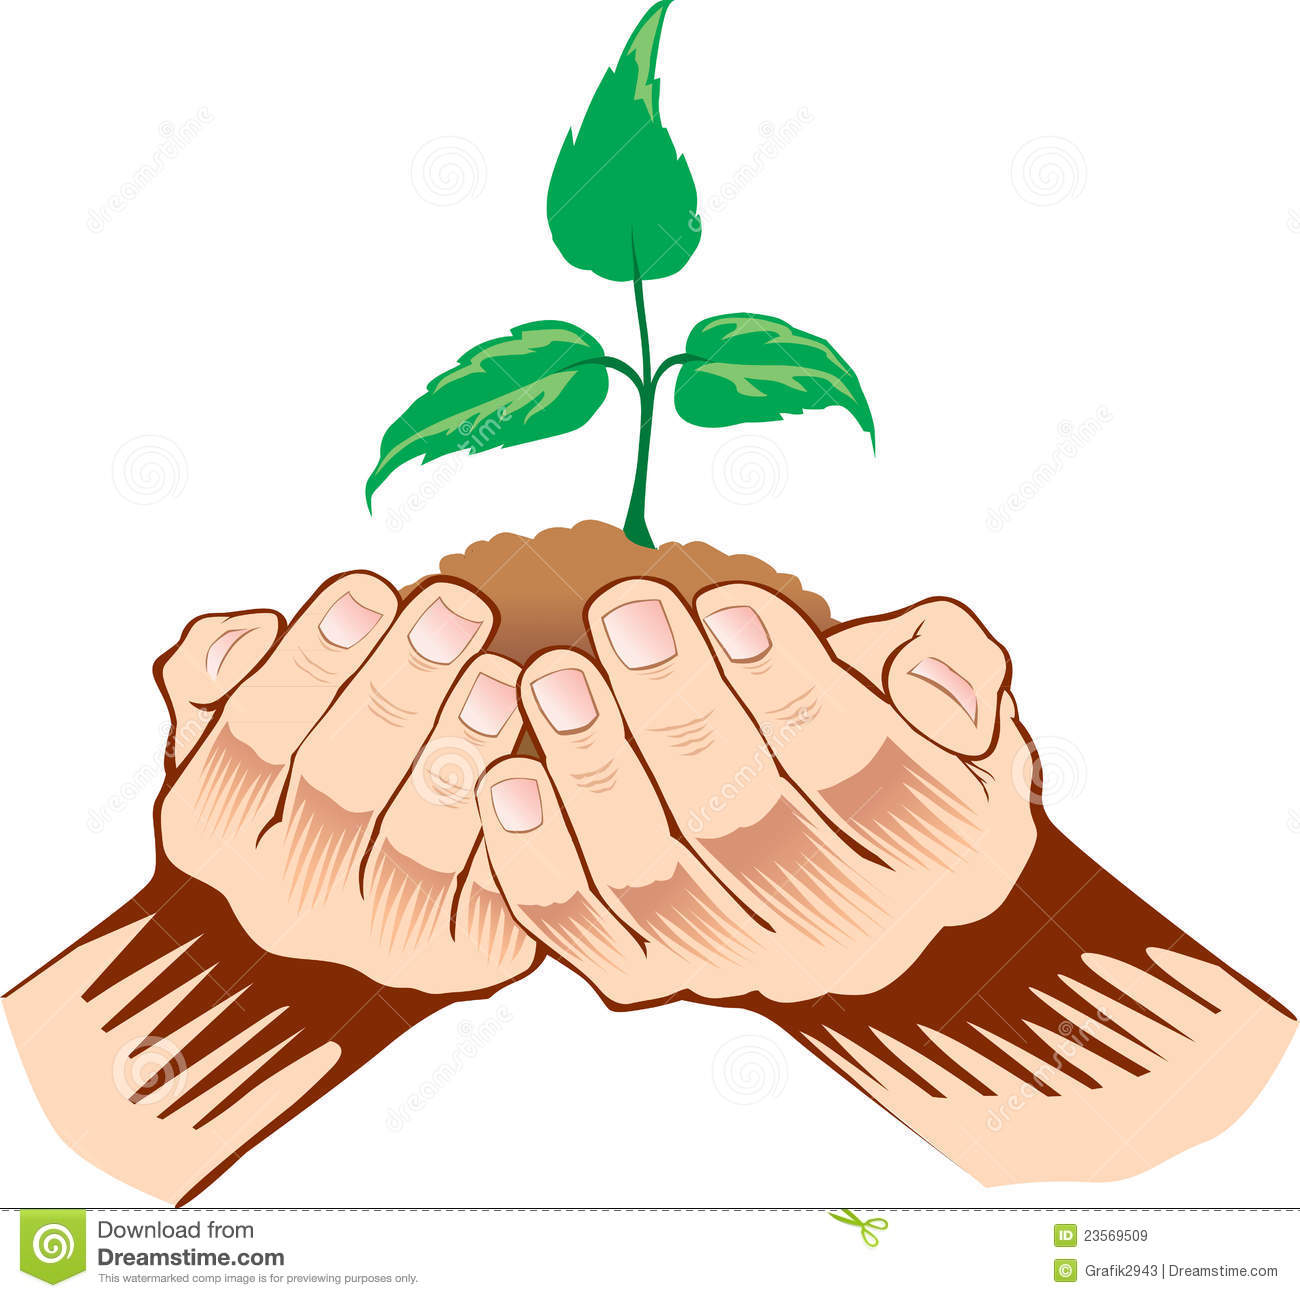 Hands Holding Sapling In Soil Royalty Free Stock Images   Image    